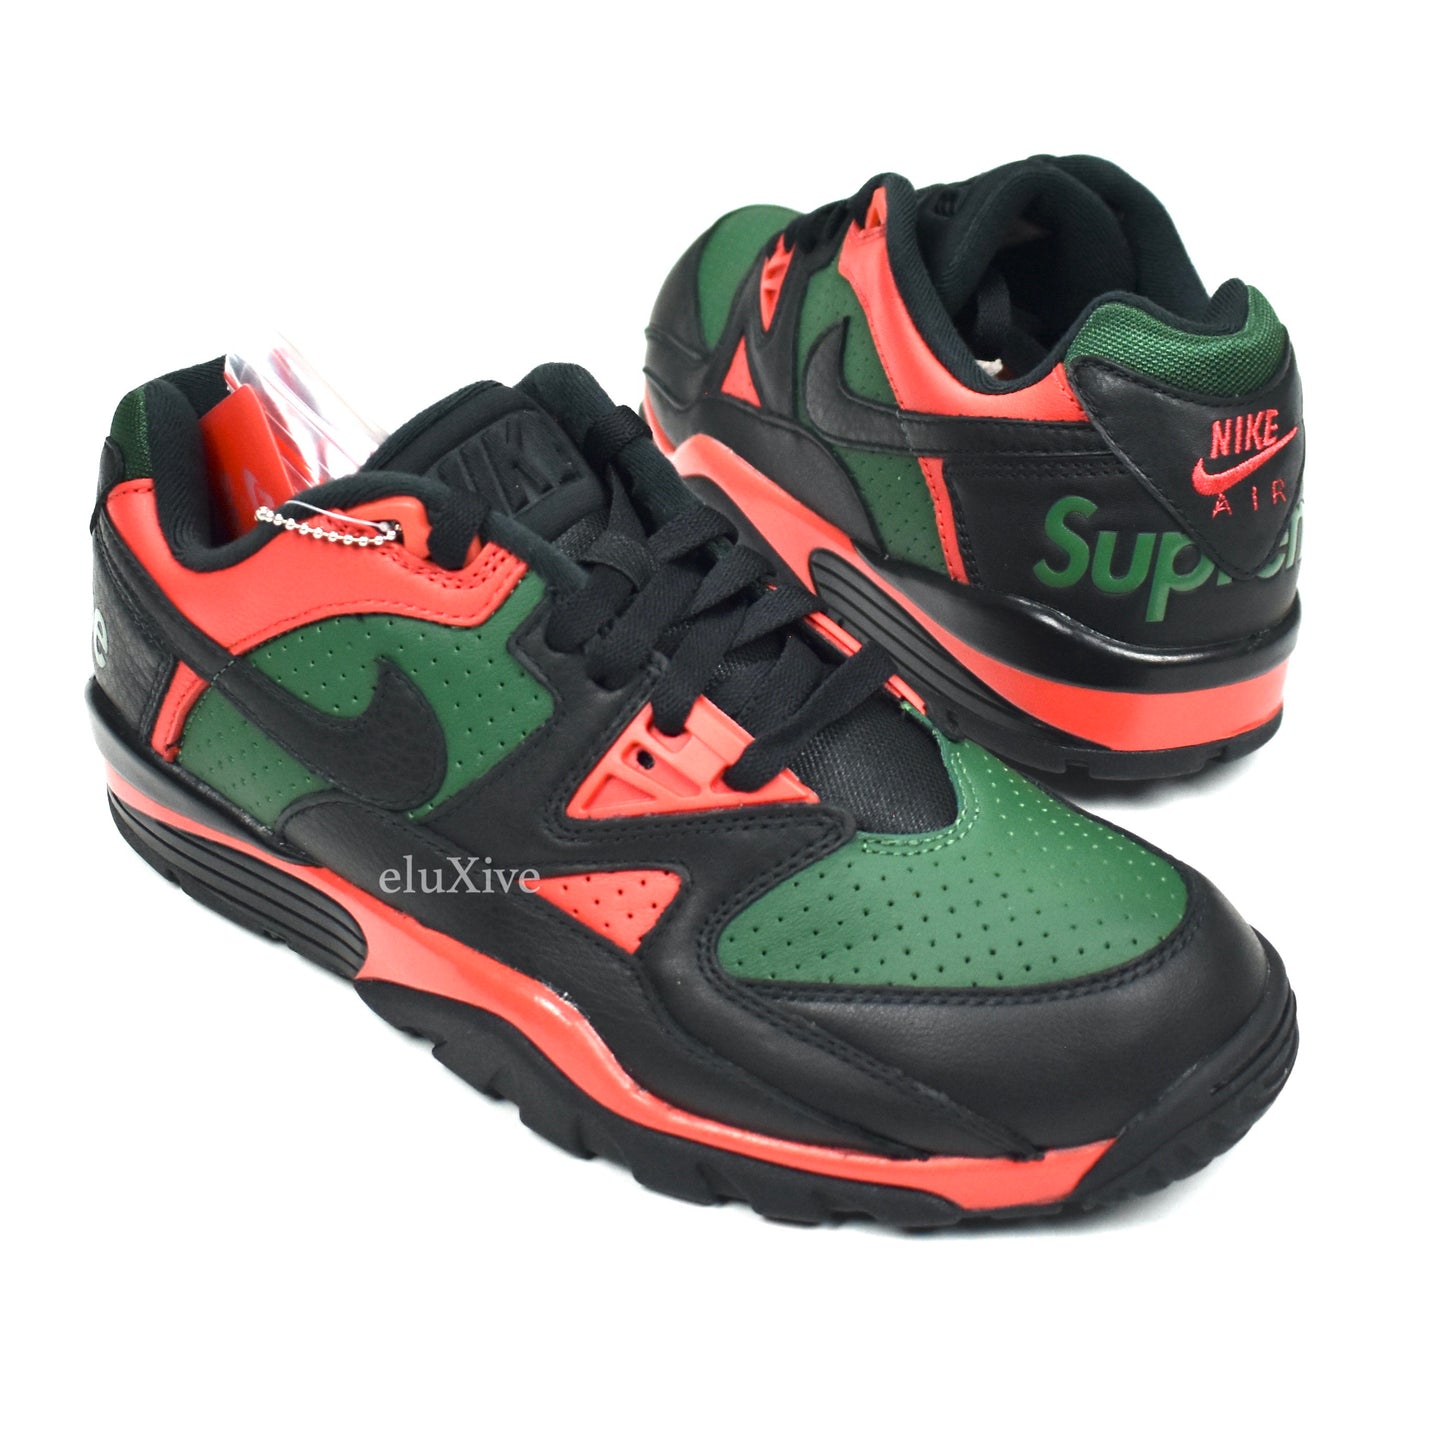 Supreme x Nike - Air Cross Trainer 3 Low 'Gucci' (Black/Red/Green)